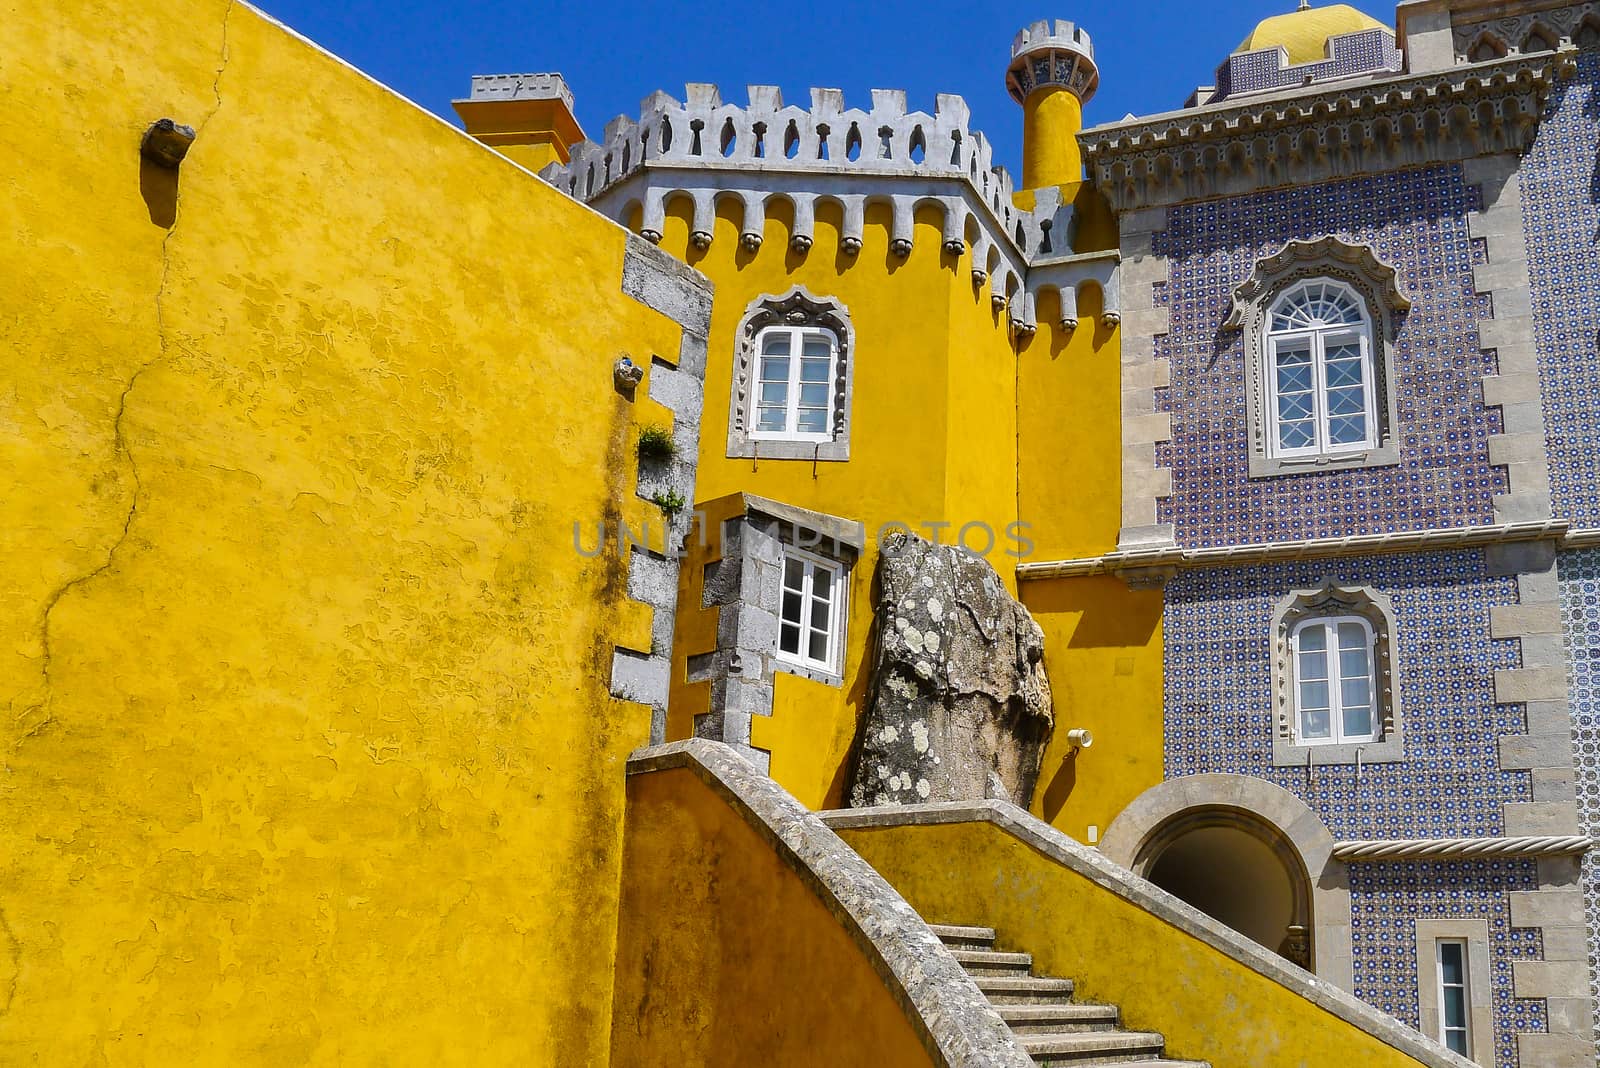 Pena National Palace in Sintra Portugal by chrisukphoto